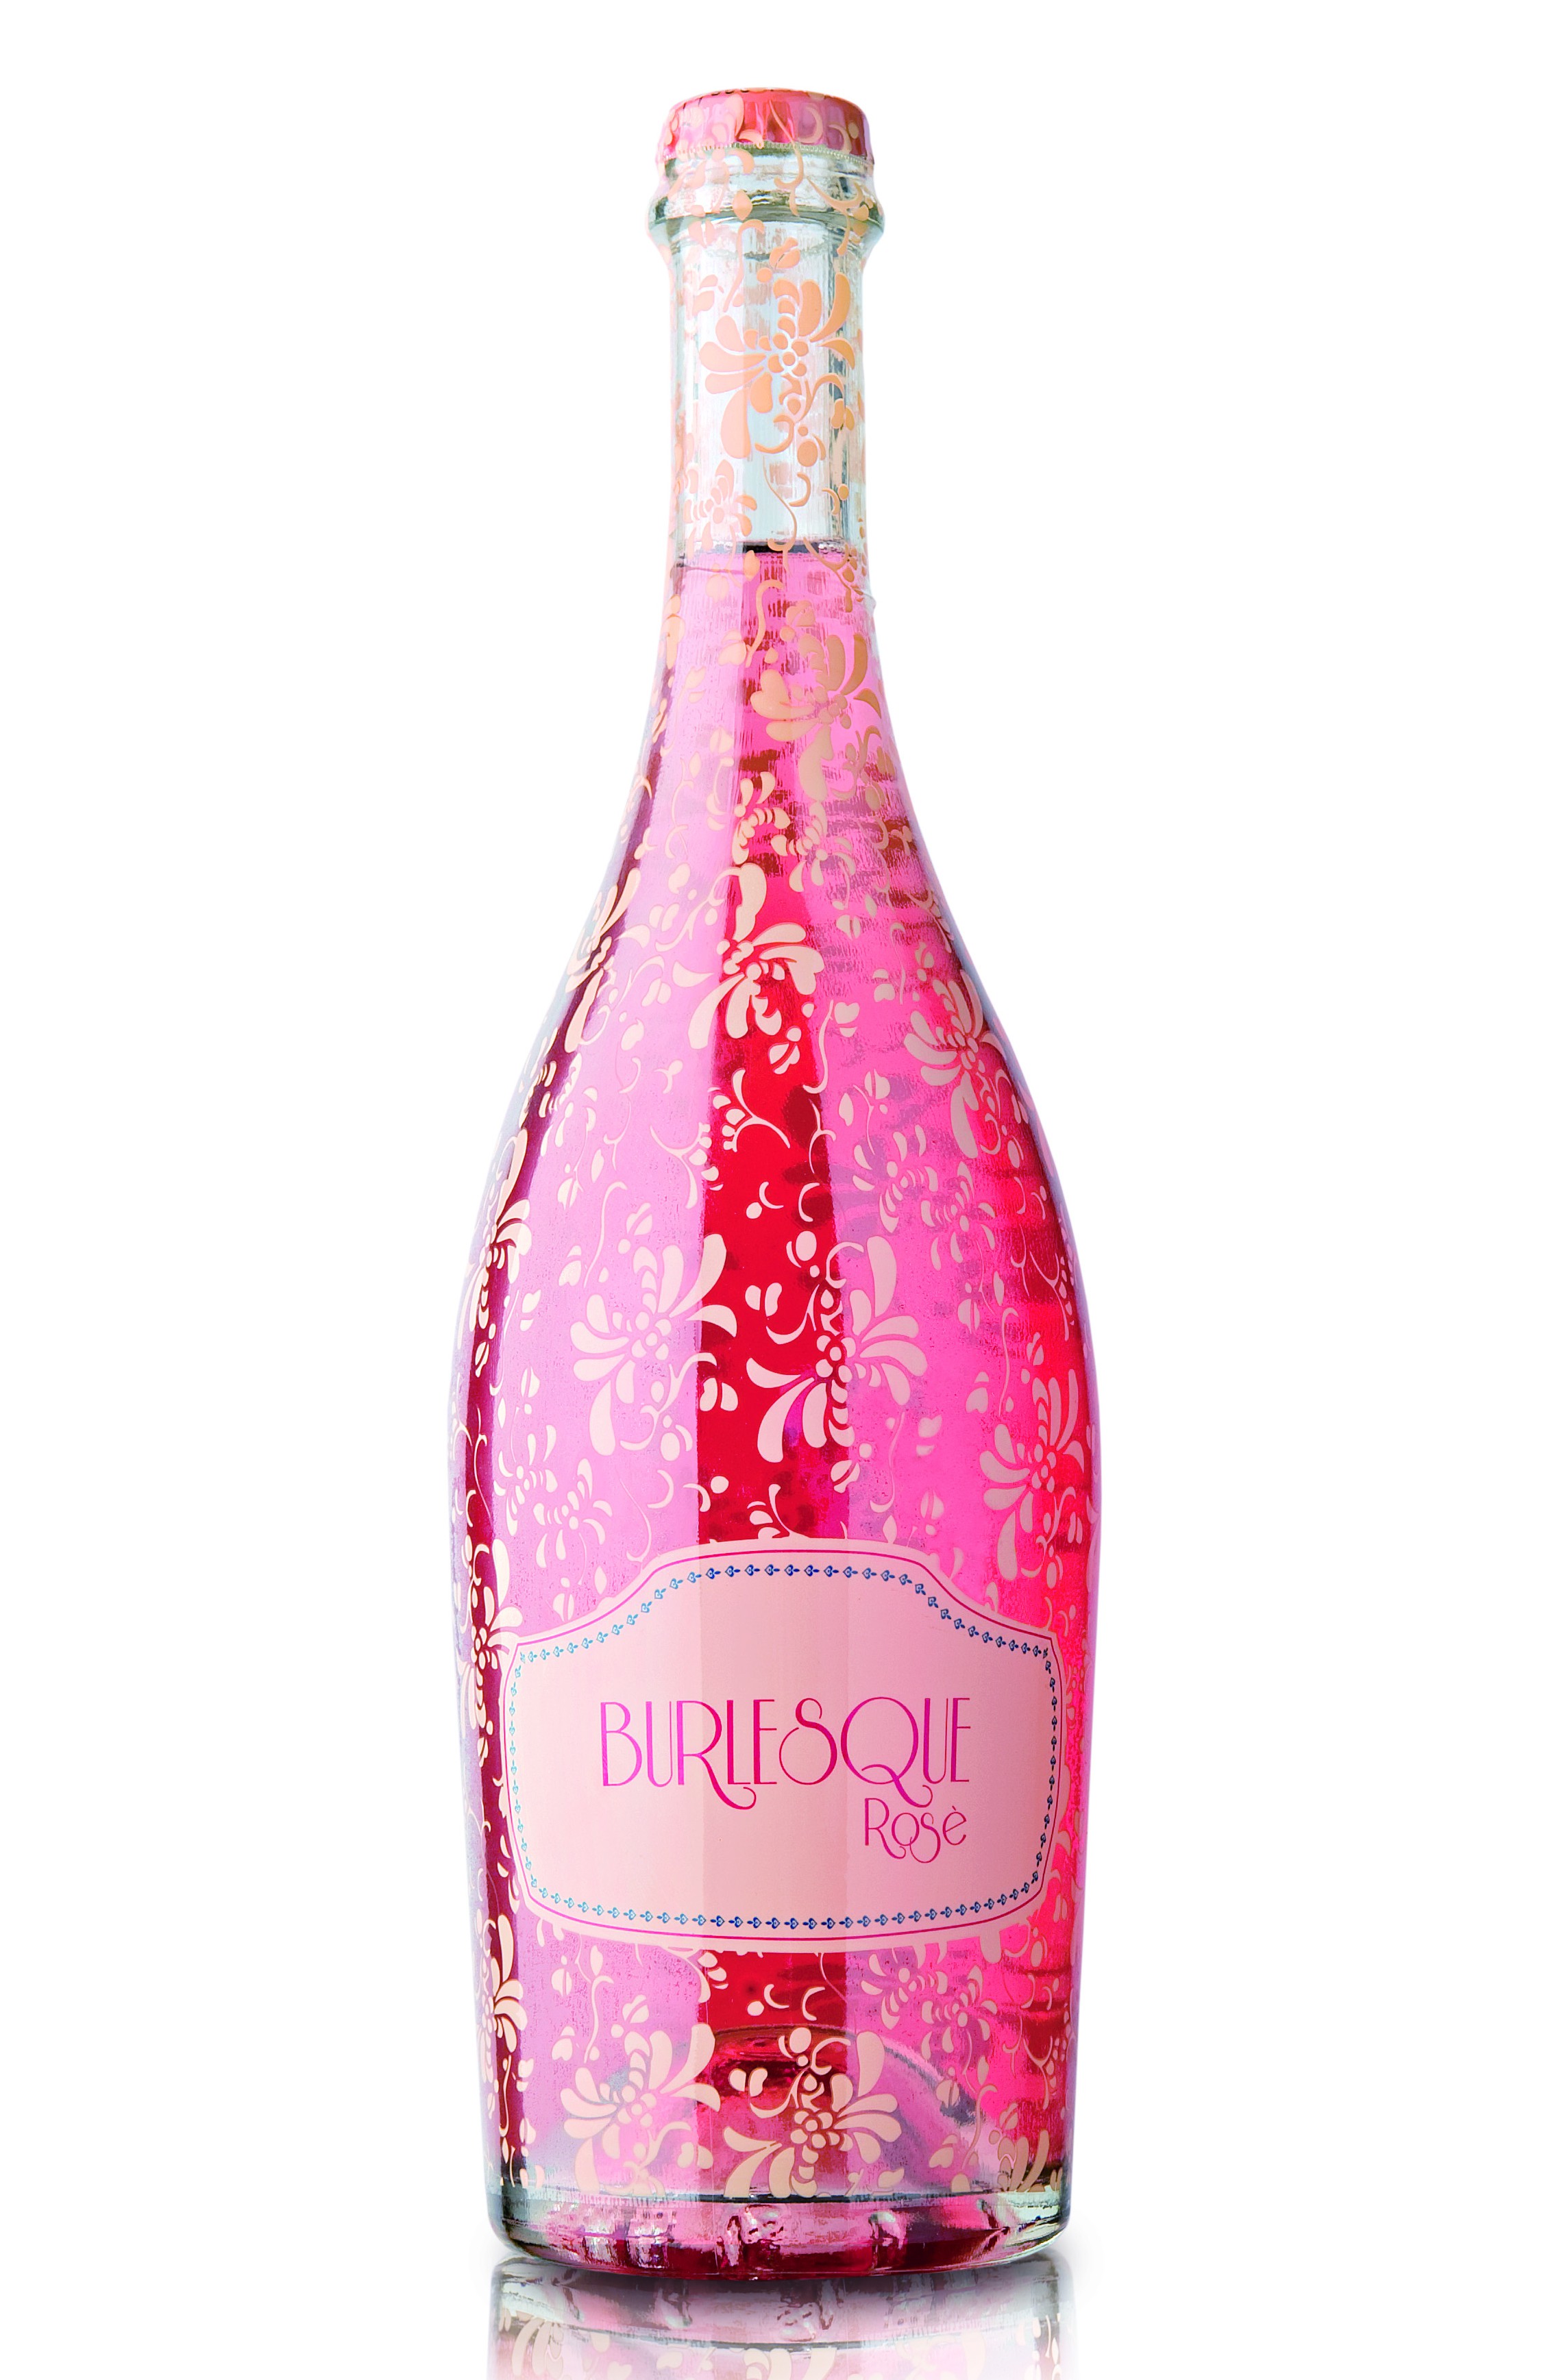 Colorful wine label for Burlesque Rosé - 10 Great Examples of Colorful Wine Labels That Stand Out